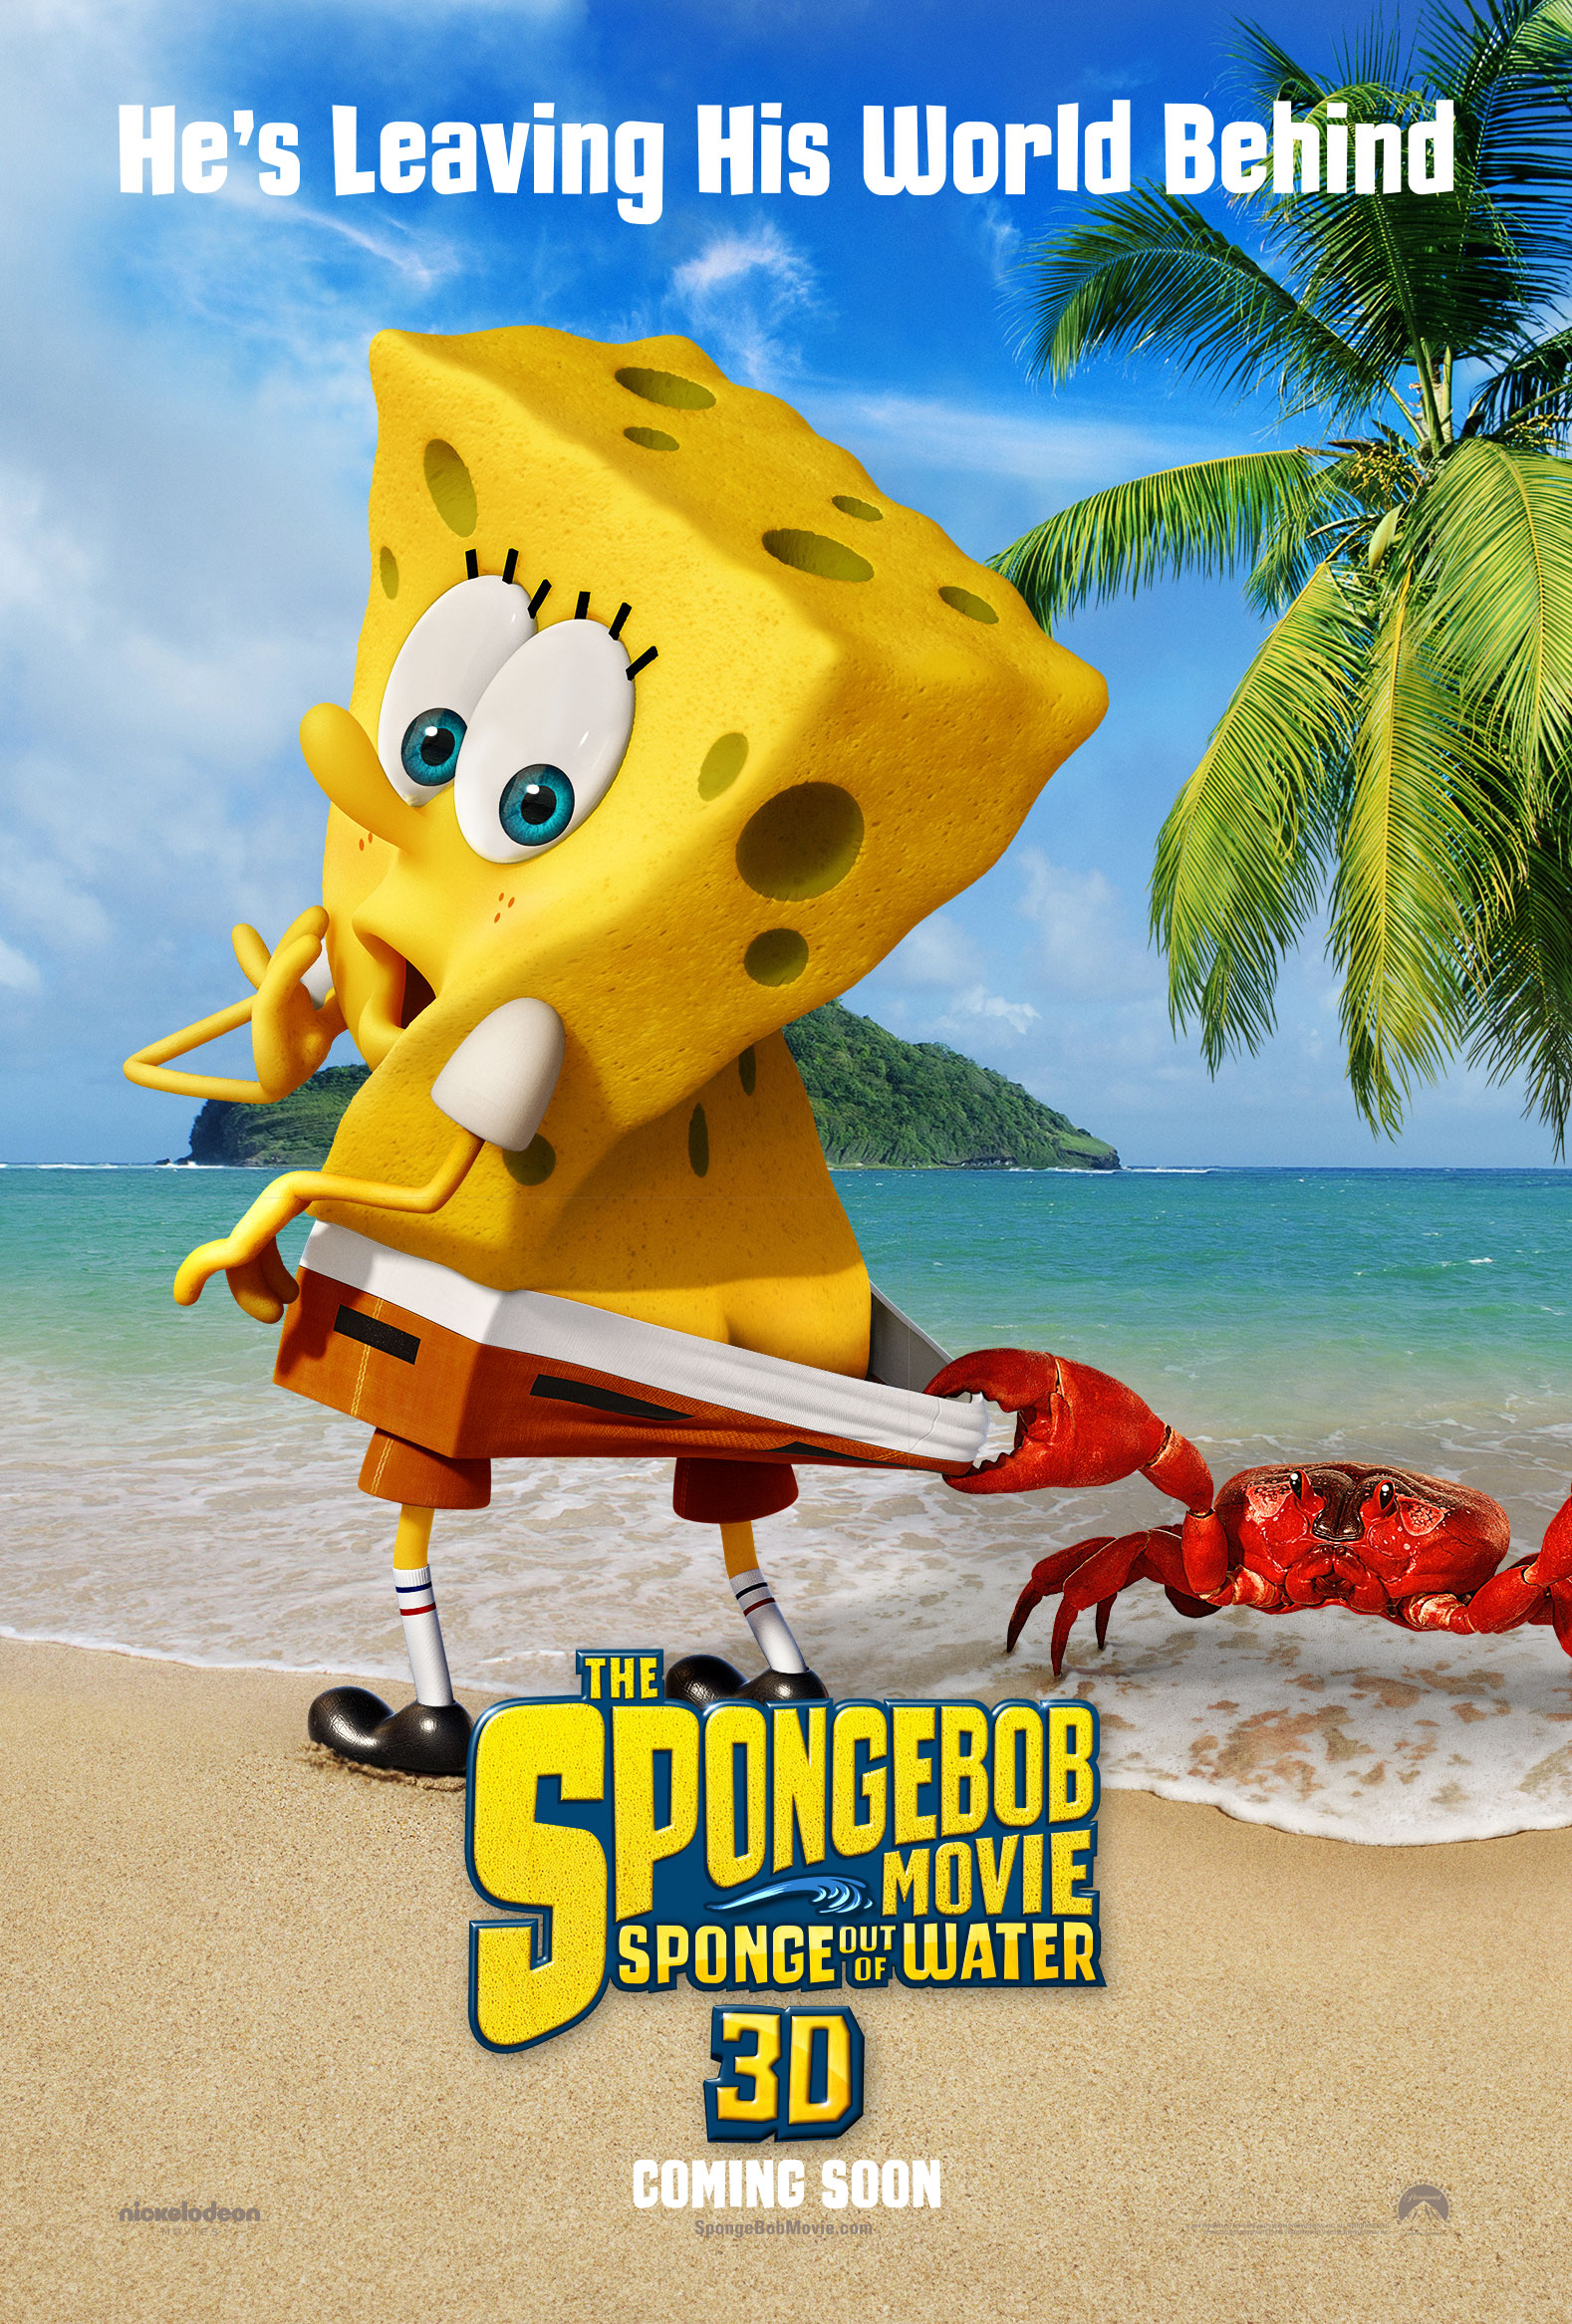 The SpongeBob Movie: Sponge Out Of Water Backgrounds, Compatible - PC, Mobile, Gadgets| 1578x2333 px